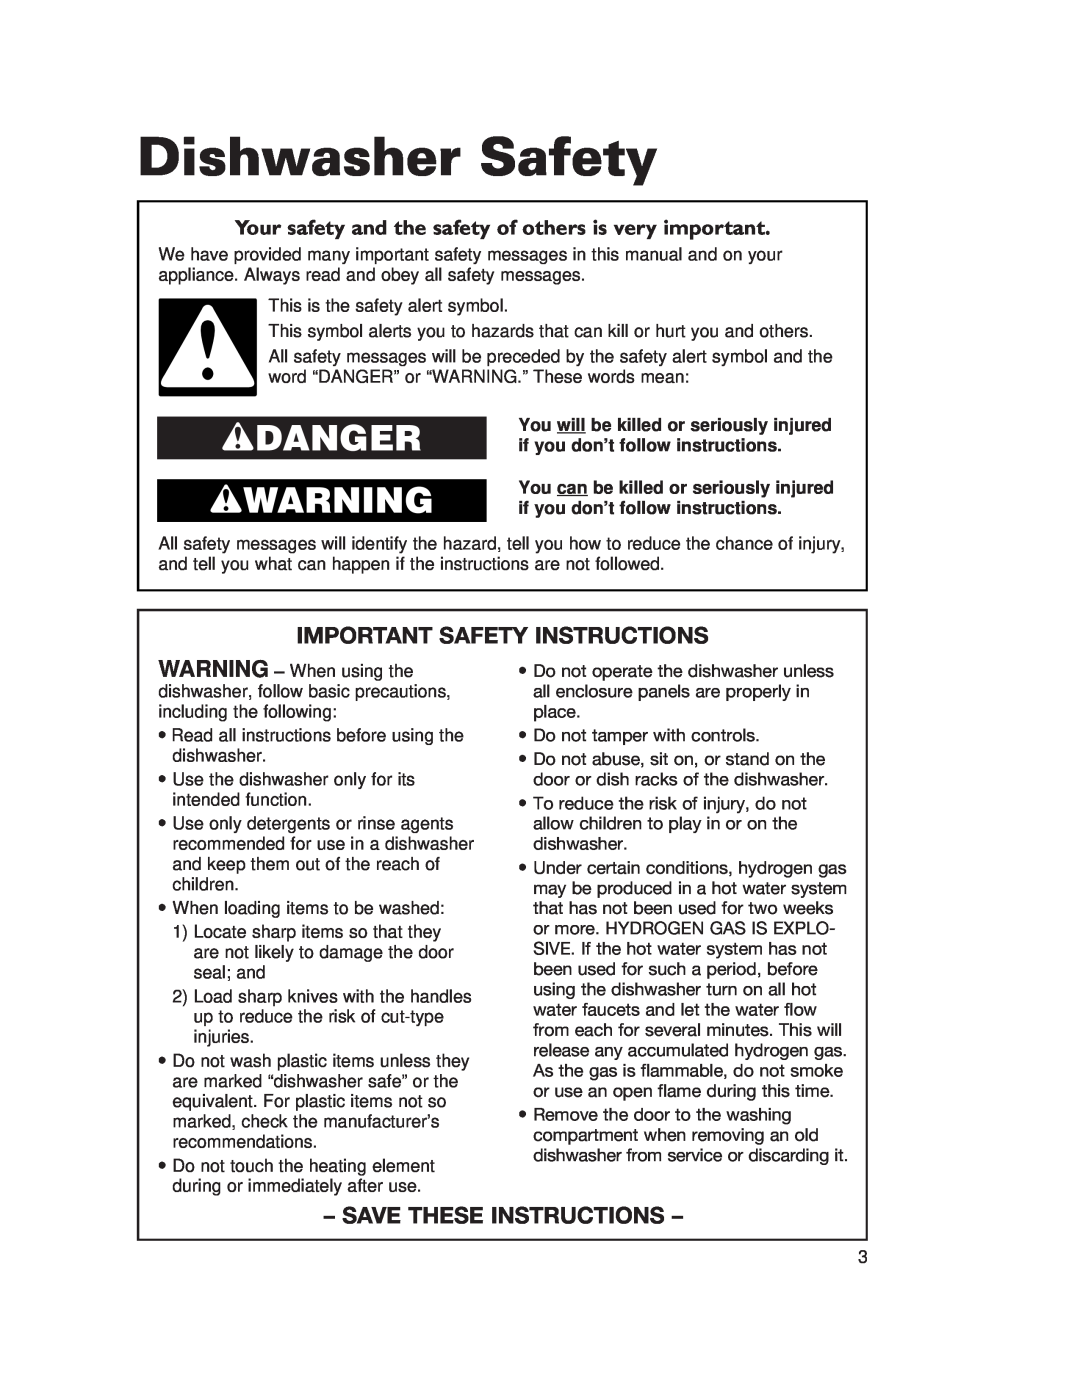 Whirlpool 980 warranty Dishwasher Safety, wDANGER wWARNING, Important Safety Instructions, Save These Instructions 